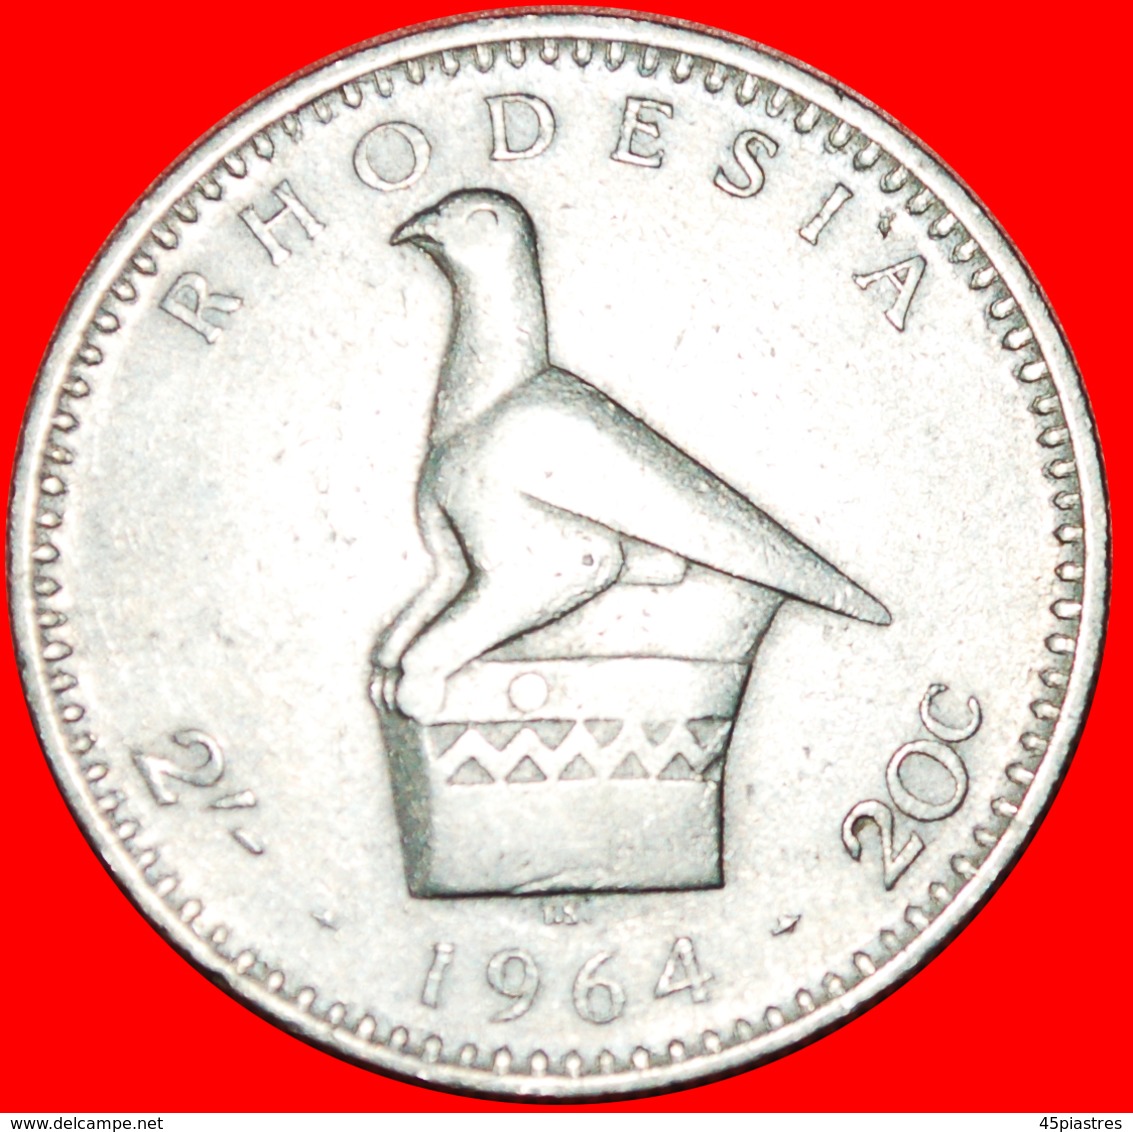 + SOUTH AFRICA : RHODESIA ★ 2 SHILLINGS  20 CENTS 1964 BIRD! LOW START ★ NO RESERVE! - Rhodésie